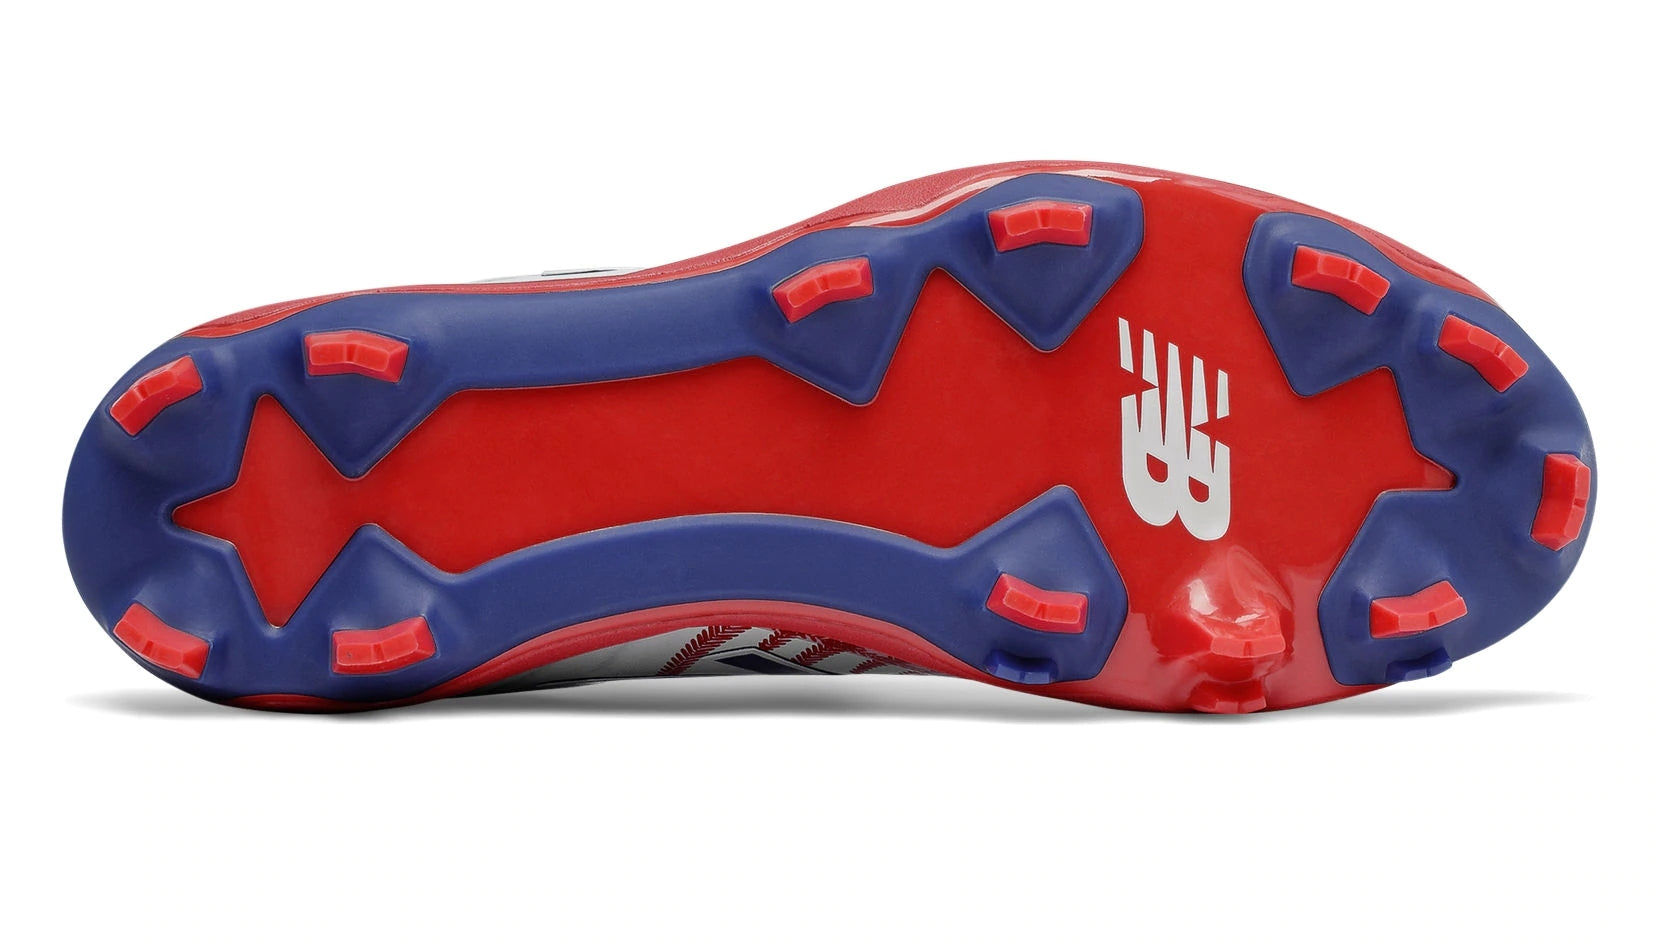 New Balance 4040v5 Adult Molded Cleats - Red/White/Blue (PL4040PR)